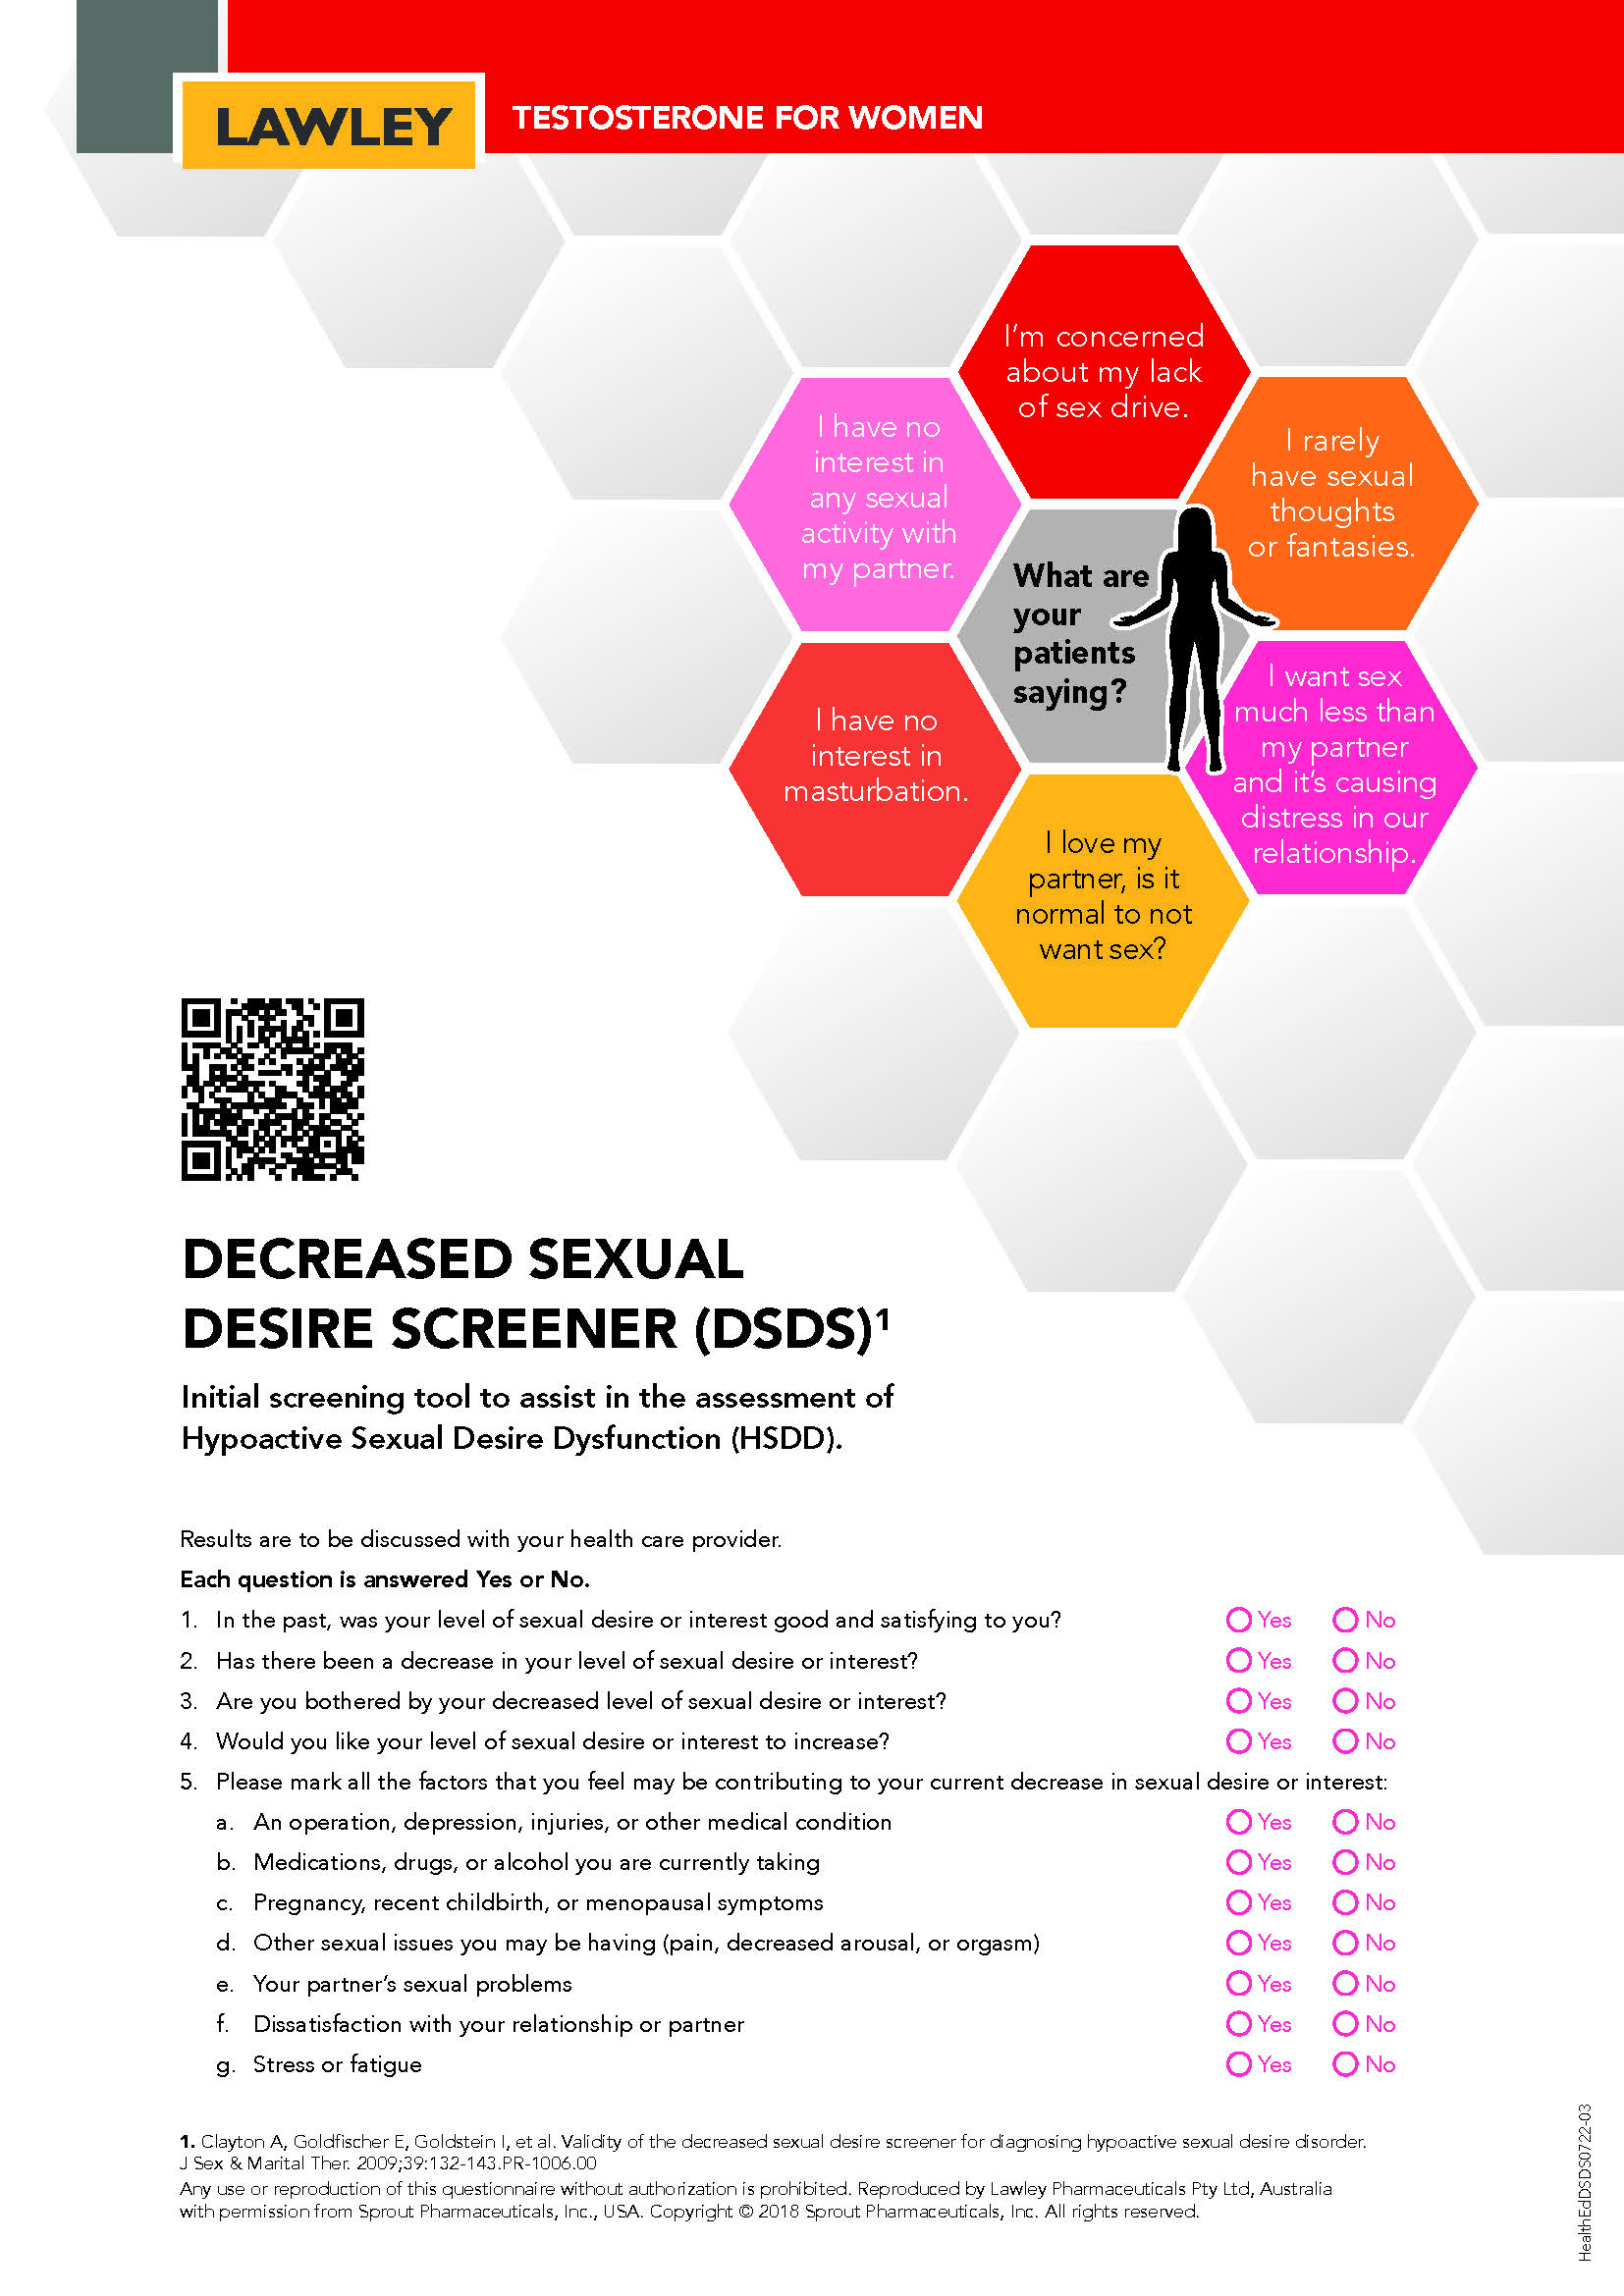 Decreased Sexual Desire Screener (DSDS) – What are your patients saying? thumbnail